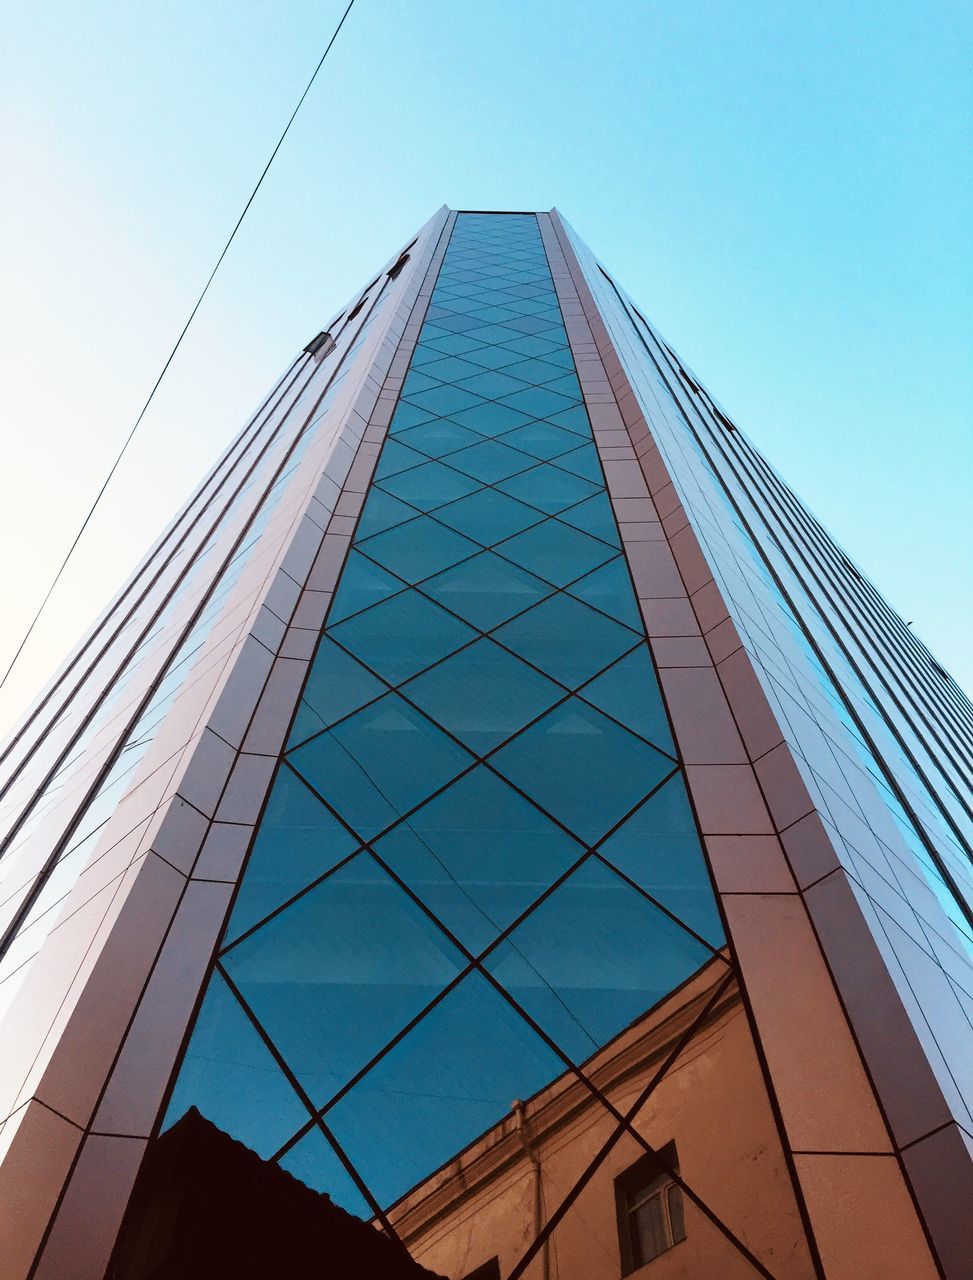 architecture, built structure, low angle view, building exterior, sky, building, city, office building exterior, modern, no people, tall - high, glass - material, skyscraper, clear sky, office, reflection, day, nature, tower, blue, outdoors, glass, directly below